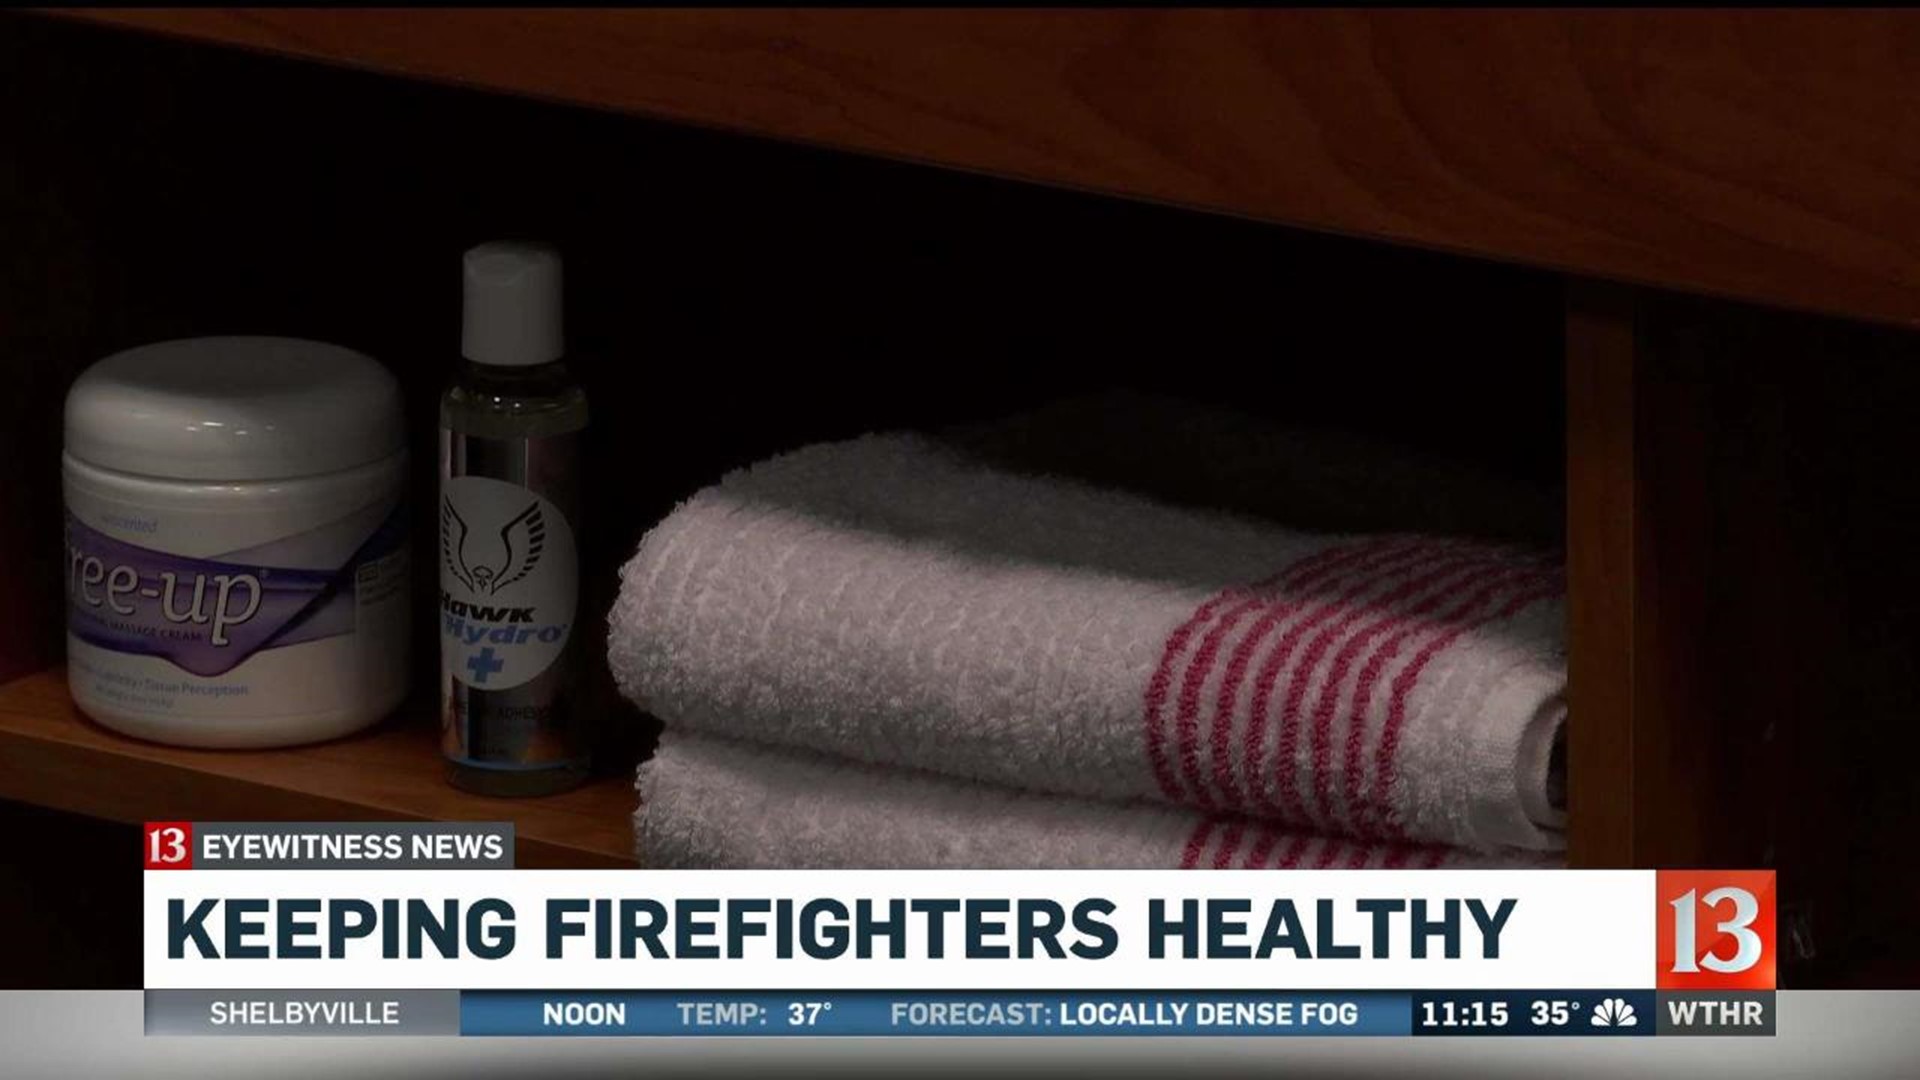 Firefighter Health and Wellness